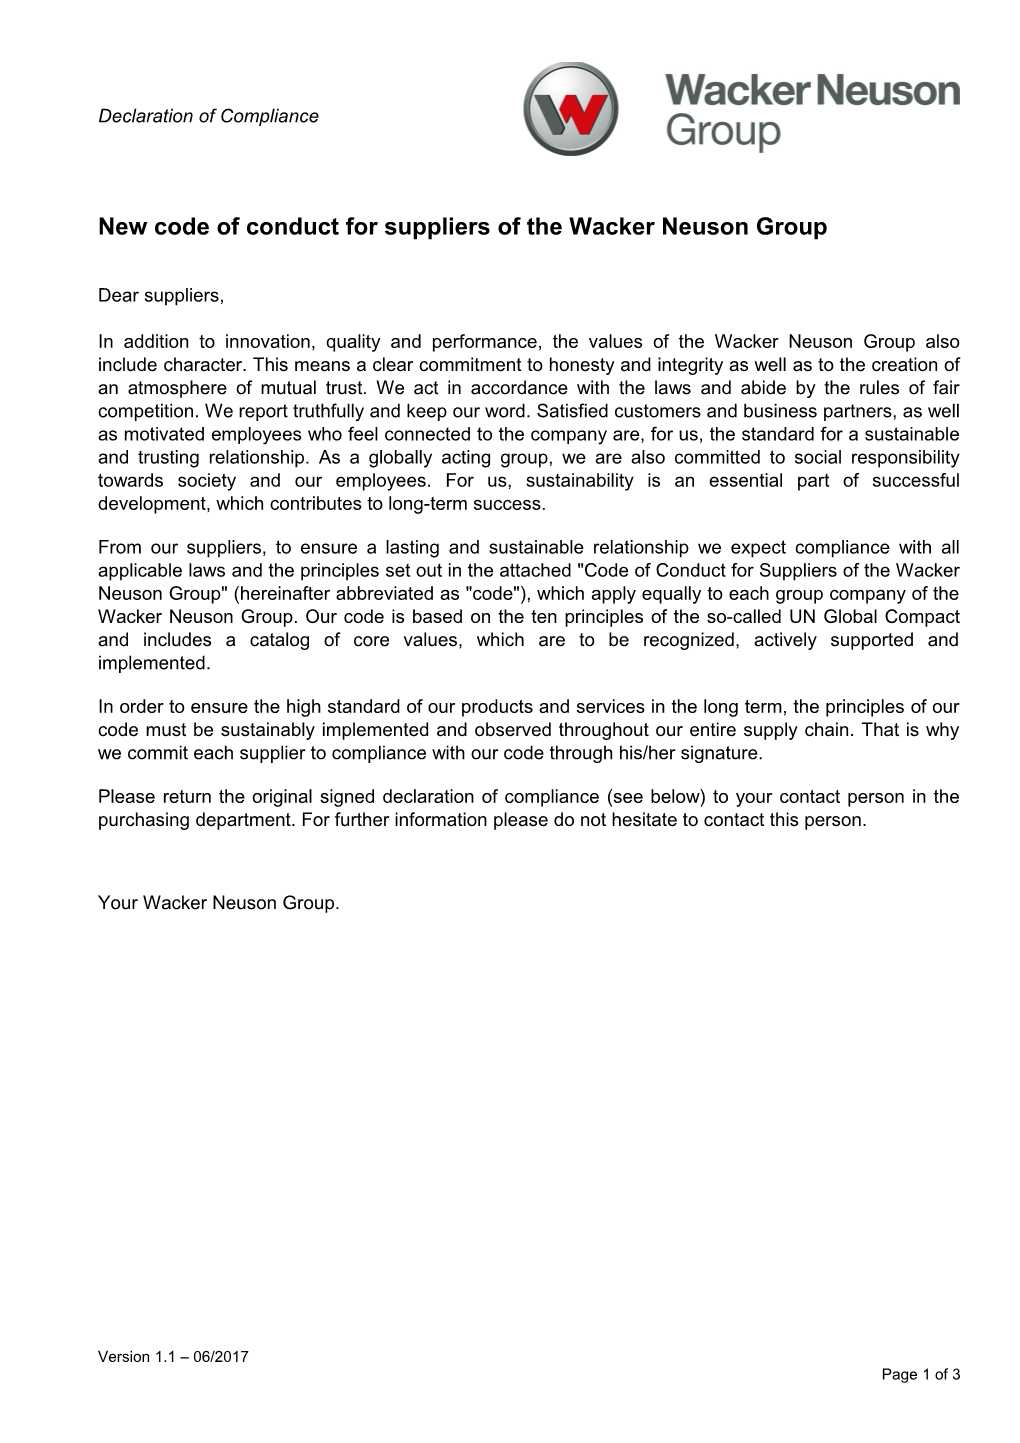 New Code of Conduct for Suppliers of the Wacker Neuson Group